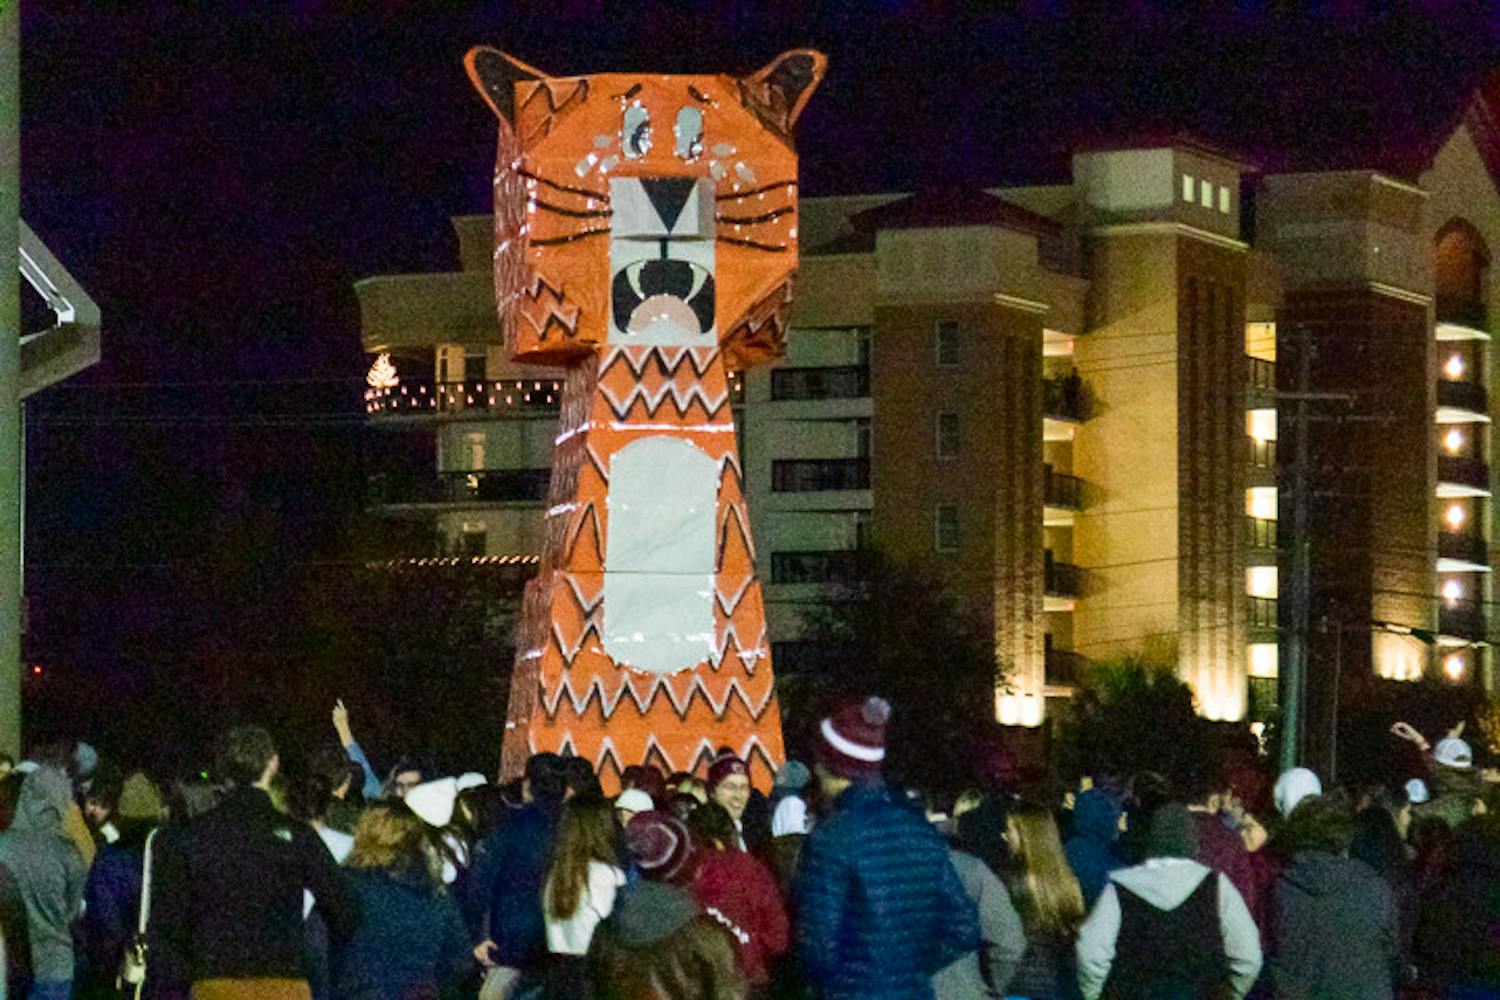 The 30-foot tall, orange and white, Clemson Tiger statue towers over a large crowd of 鶹С򽴫ý students on Nov. 21, 2022. The tiger was constructed in the middle of the Bluff Road Intermural field by the 鶹С򽴫ý American Society of Mechanical Engineers and Society of Hispanic Professional Engineers constructed the effigy for this year's event.